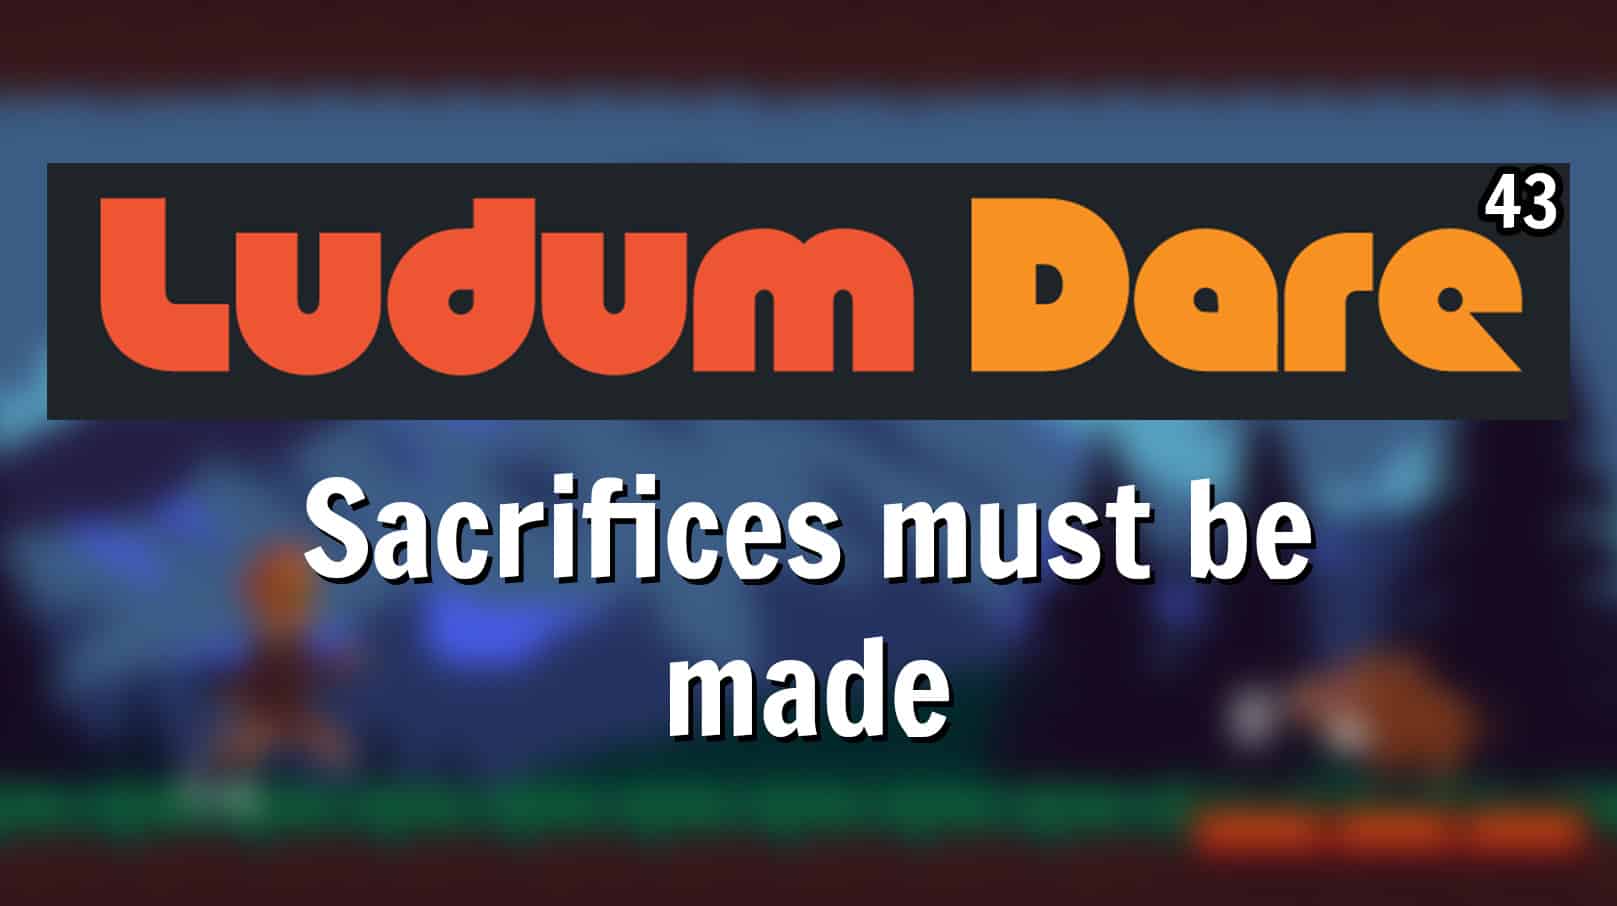 My participation in Ludum dare 43 – Sacrifices must be made